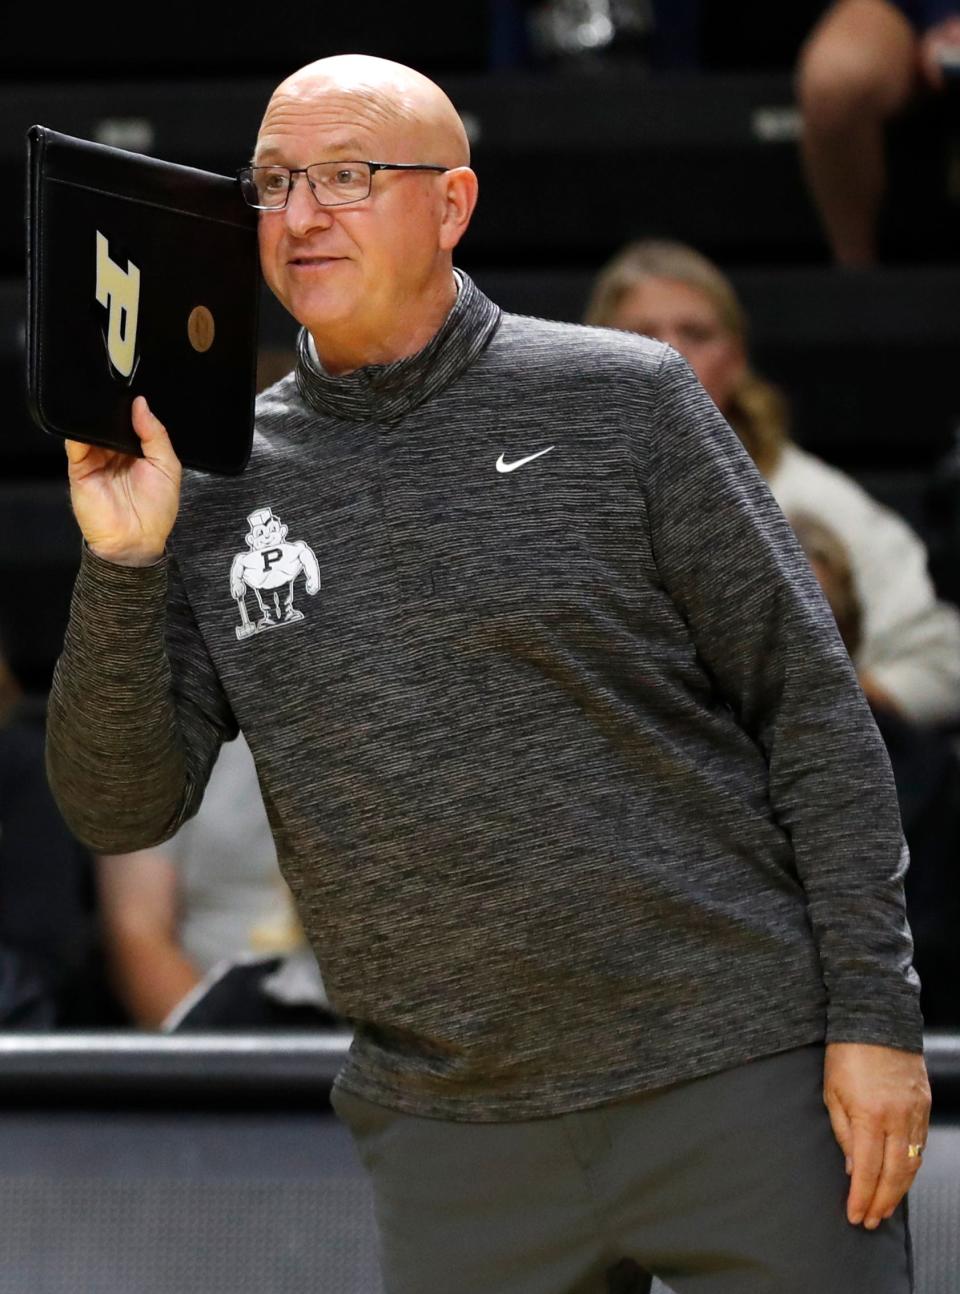 Purdue Boilermakers head coach Dave Shondell yells down court during the NCAA women’s volleyball match against the Central Florida Knights, Thursday, Sept. 14, 2023, at Holloway Gymnasium in West Lafayette, Ind.